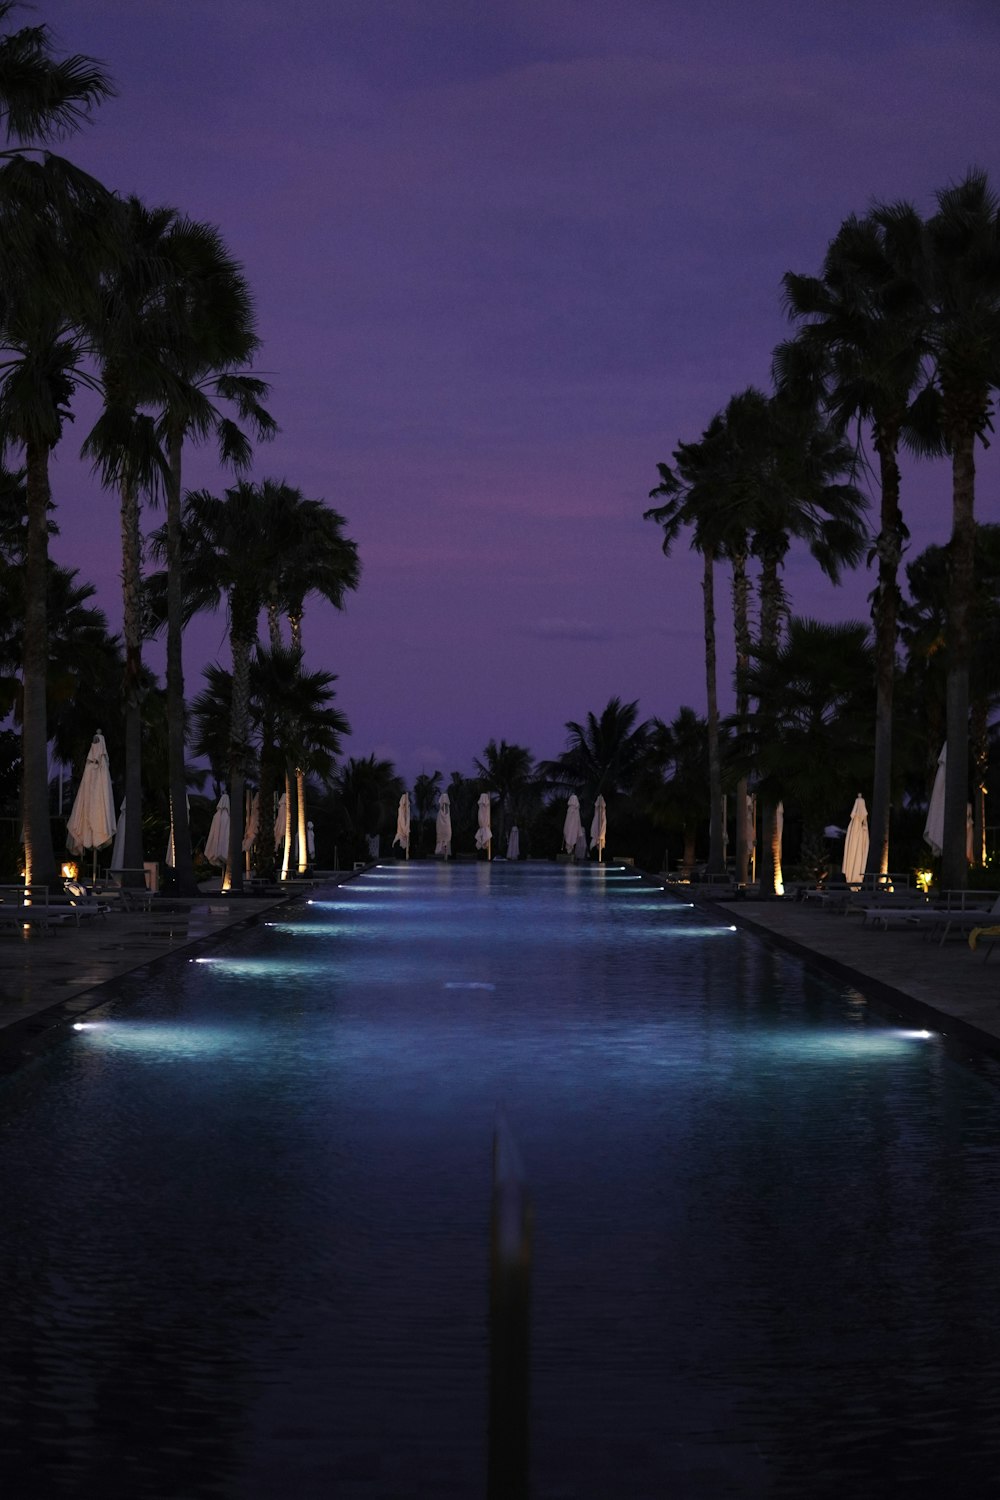 a long pool surrounded by palm trees at night